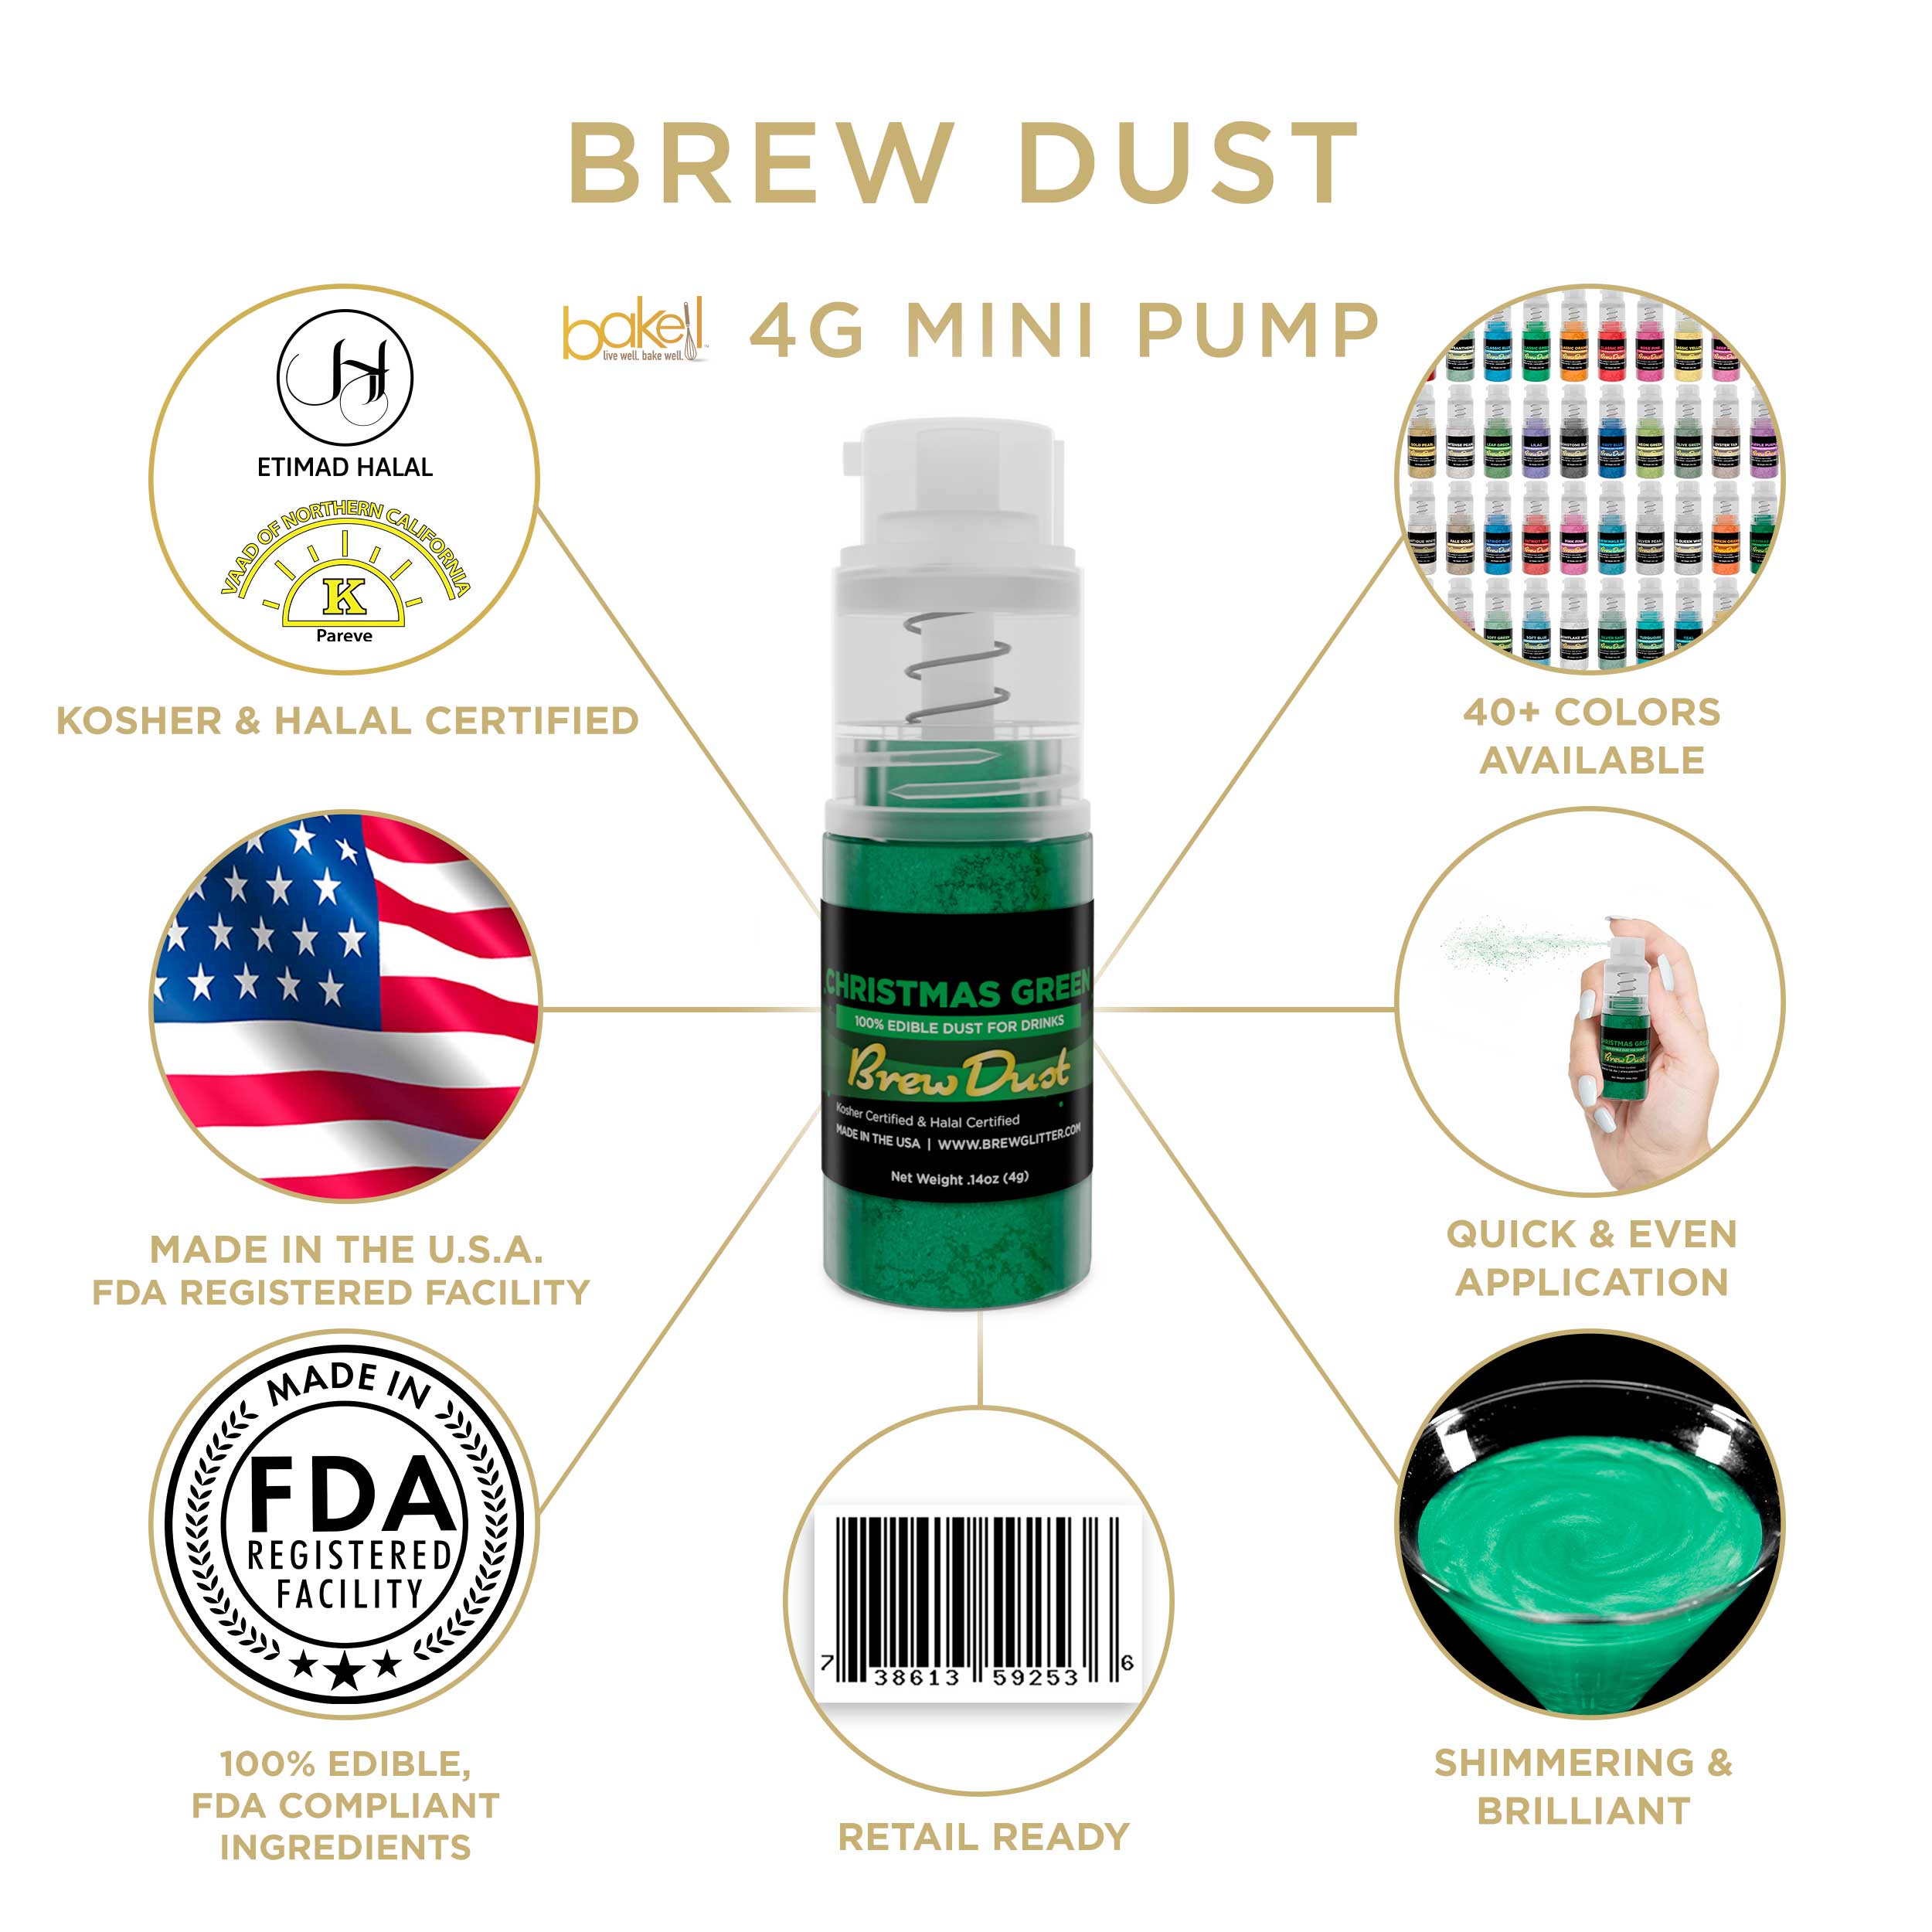 Christmas Green Brew Dust Miniature Spray Pump | Infographic and Information